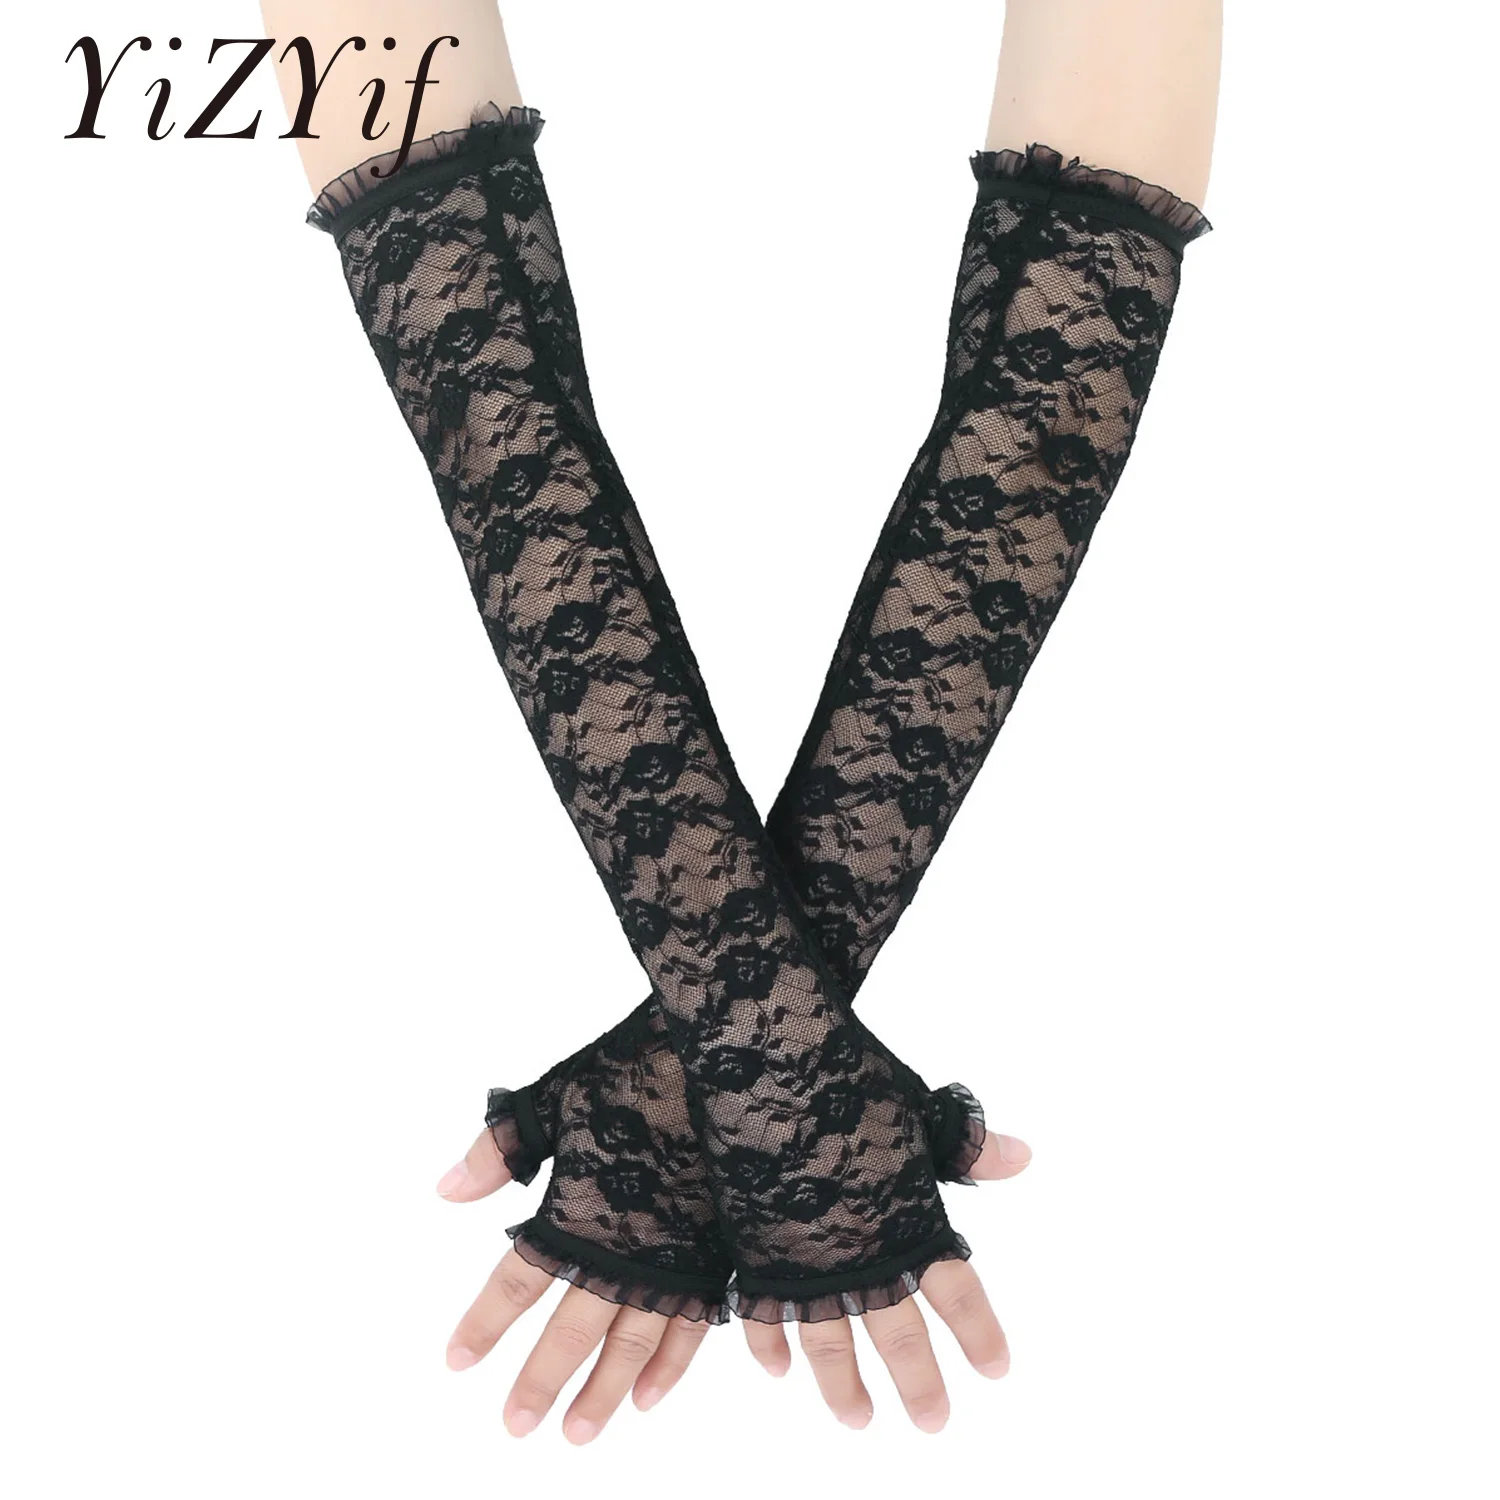 Asooll Winter Fingerless Lace Gloves Wrist Cosplay Length Finger Gloves Fashion Prom Party Driving Wedding Gloves for Women and Girls 